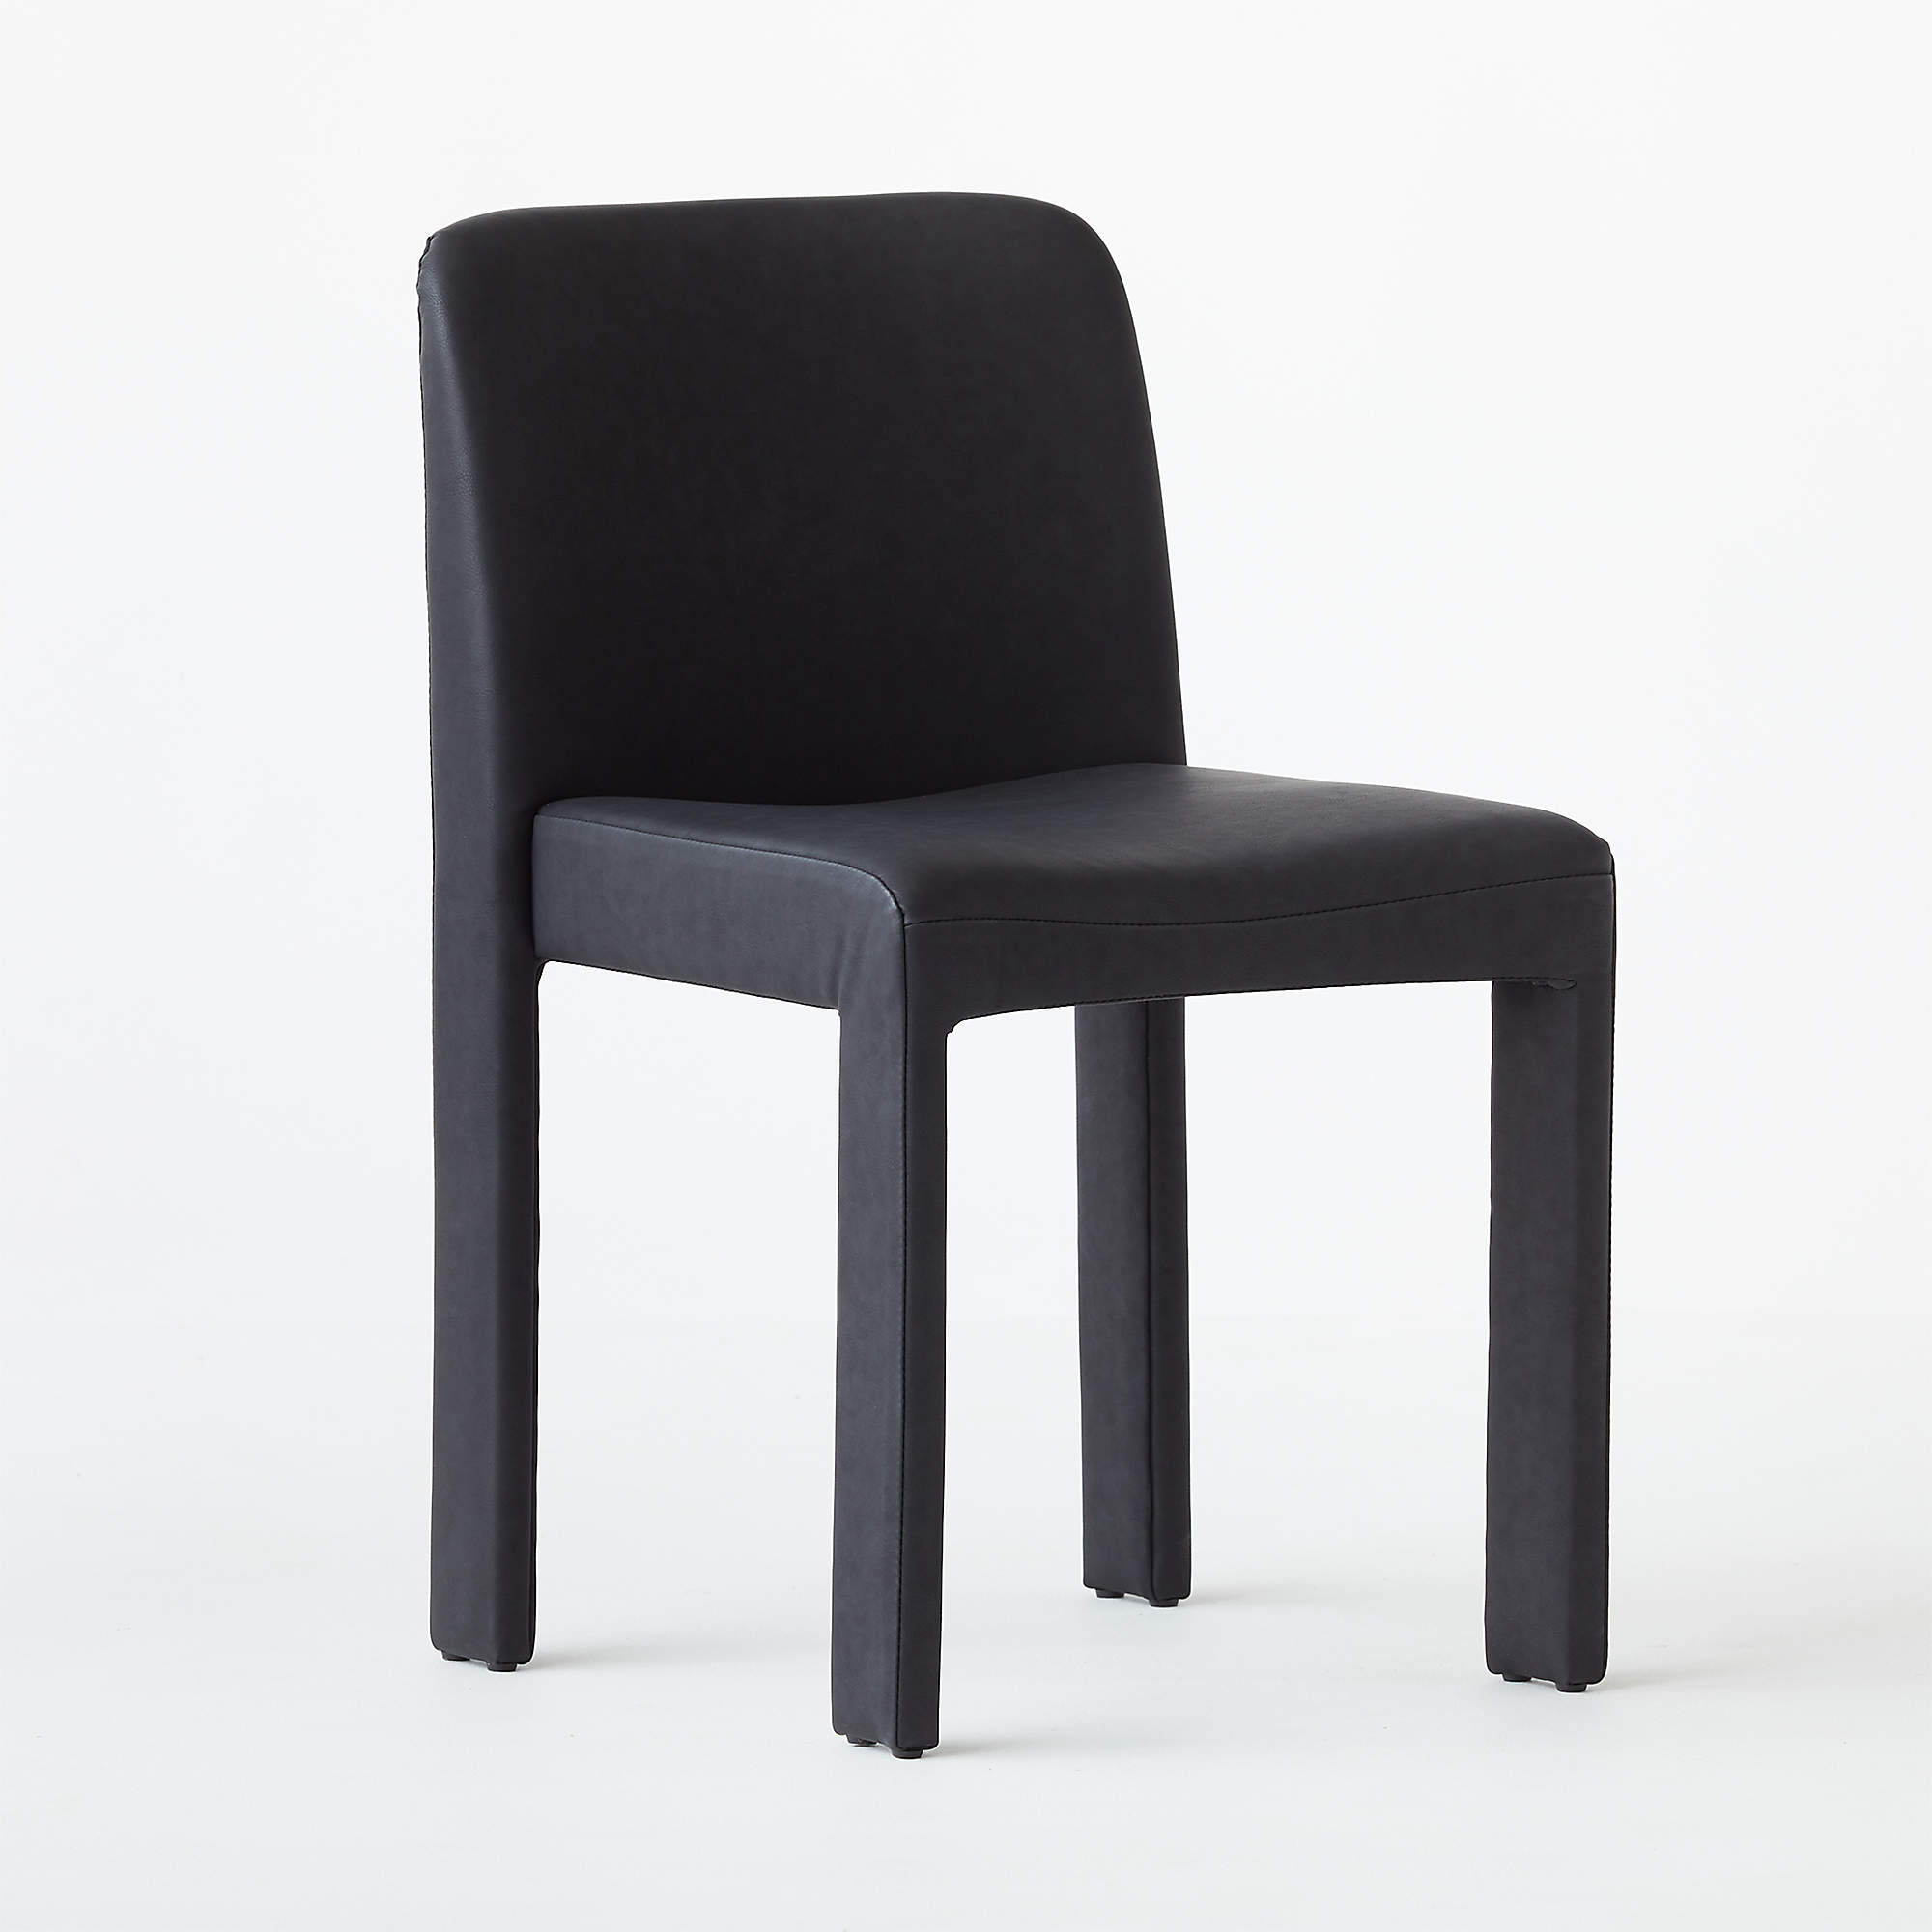 Hide Faux Leather Black Dining Chair + Reviews | CB2 in 2021 | Black